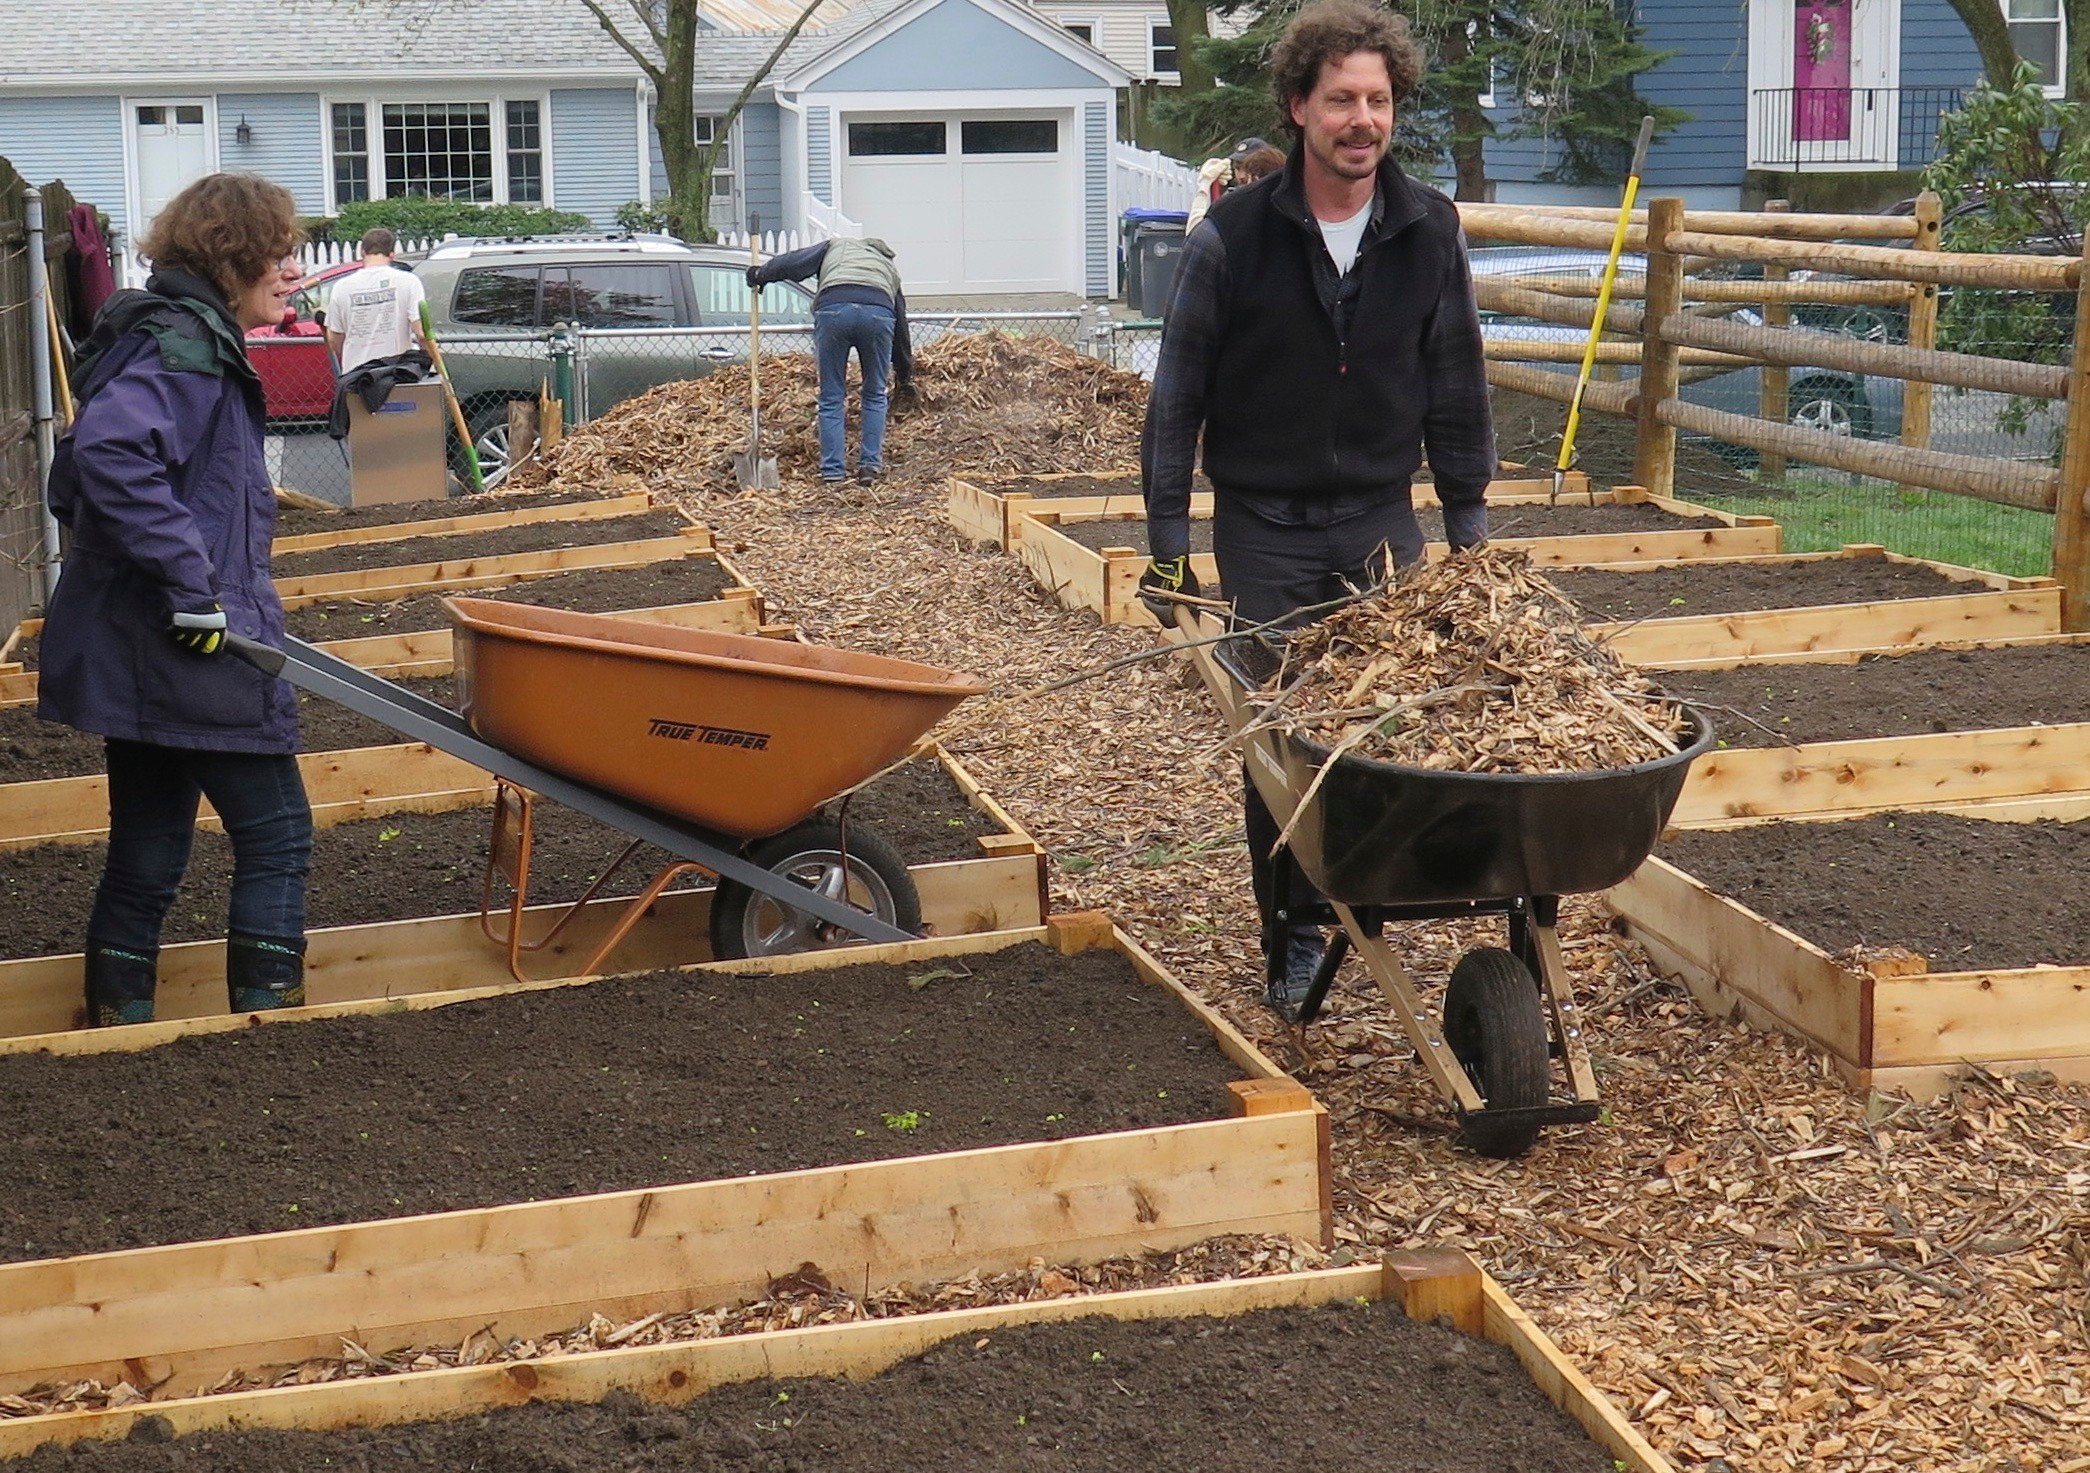 Wheelbarrows and muscles spread mulch between the raised beds of the Summit Neighborhood Community Gardens on April 22, Earth Day.